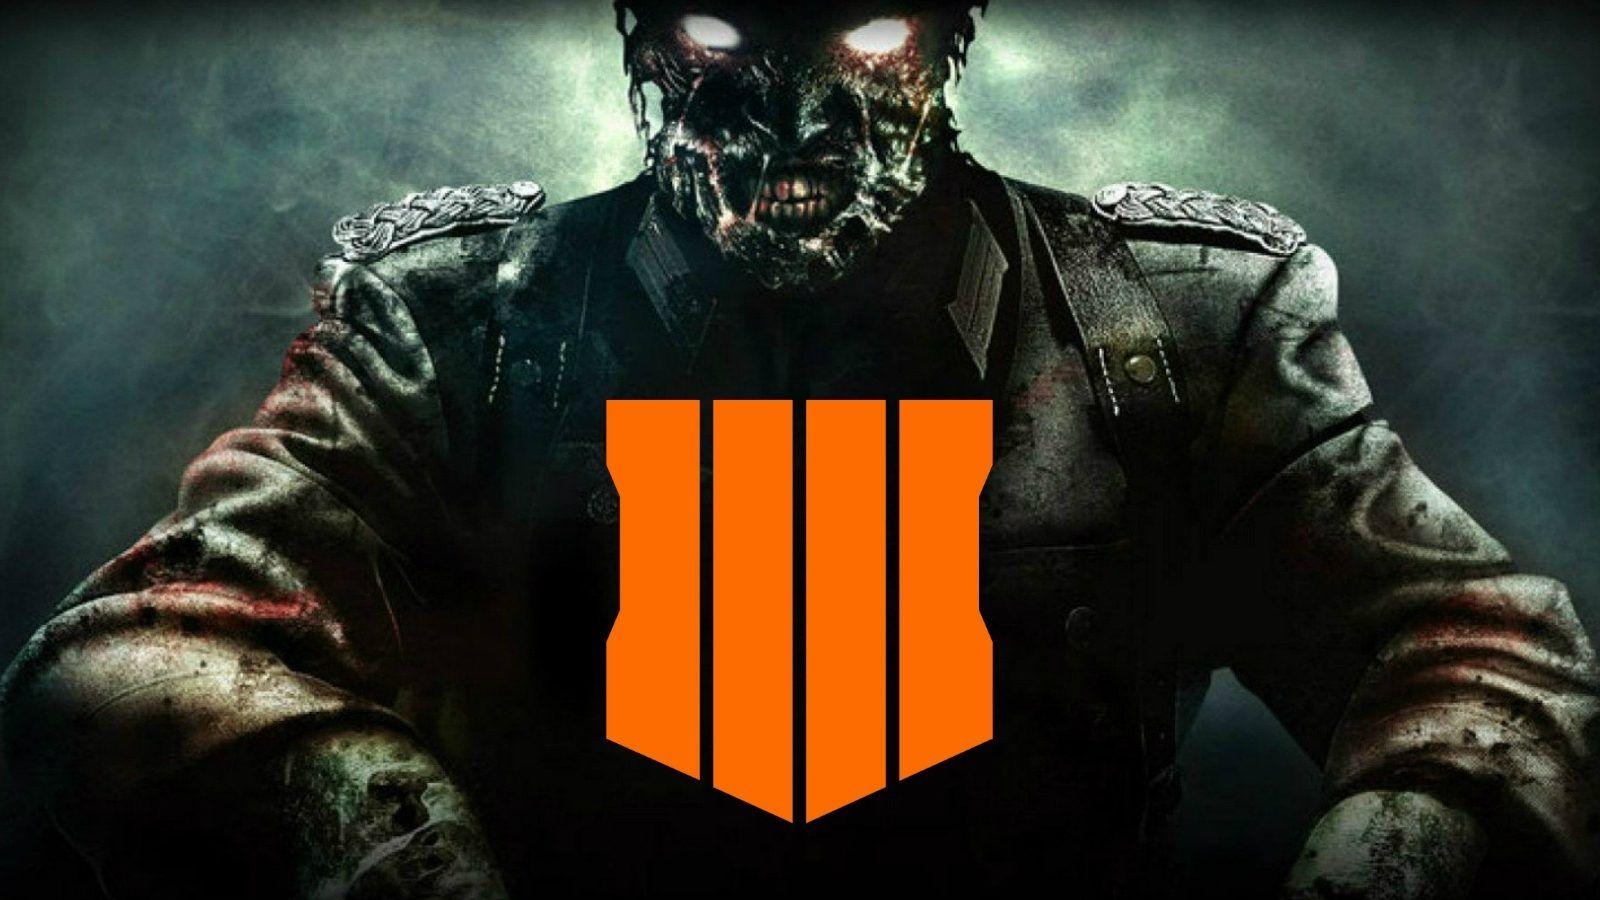 Call of Duty: Black Ops 4 Zombies Hinted To Feature At Upcoming E3